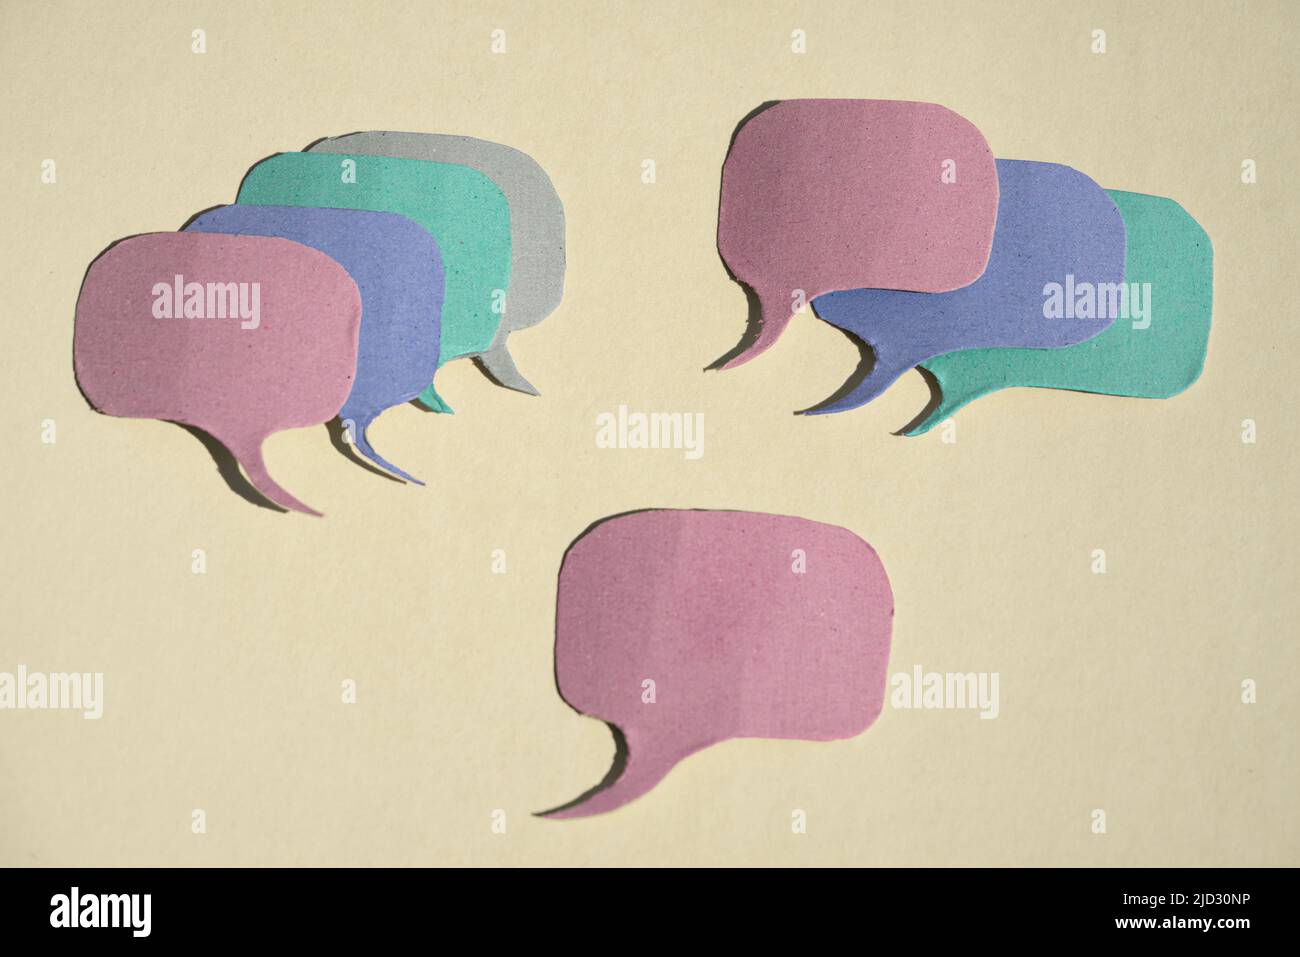 Pros and cons.Group of speech bubbles cut out of cardboard with multiple positions for and against the mainstream opinion. Stock Photo